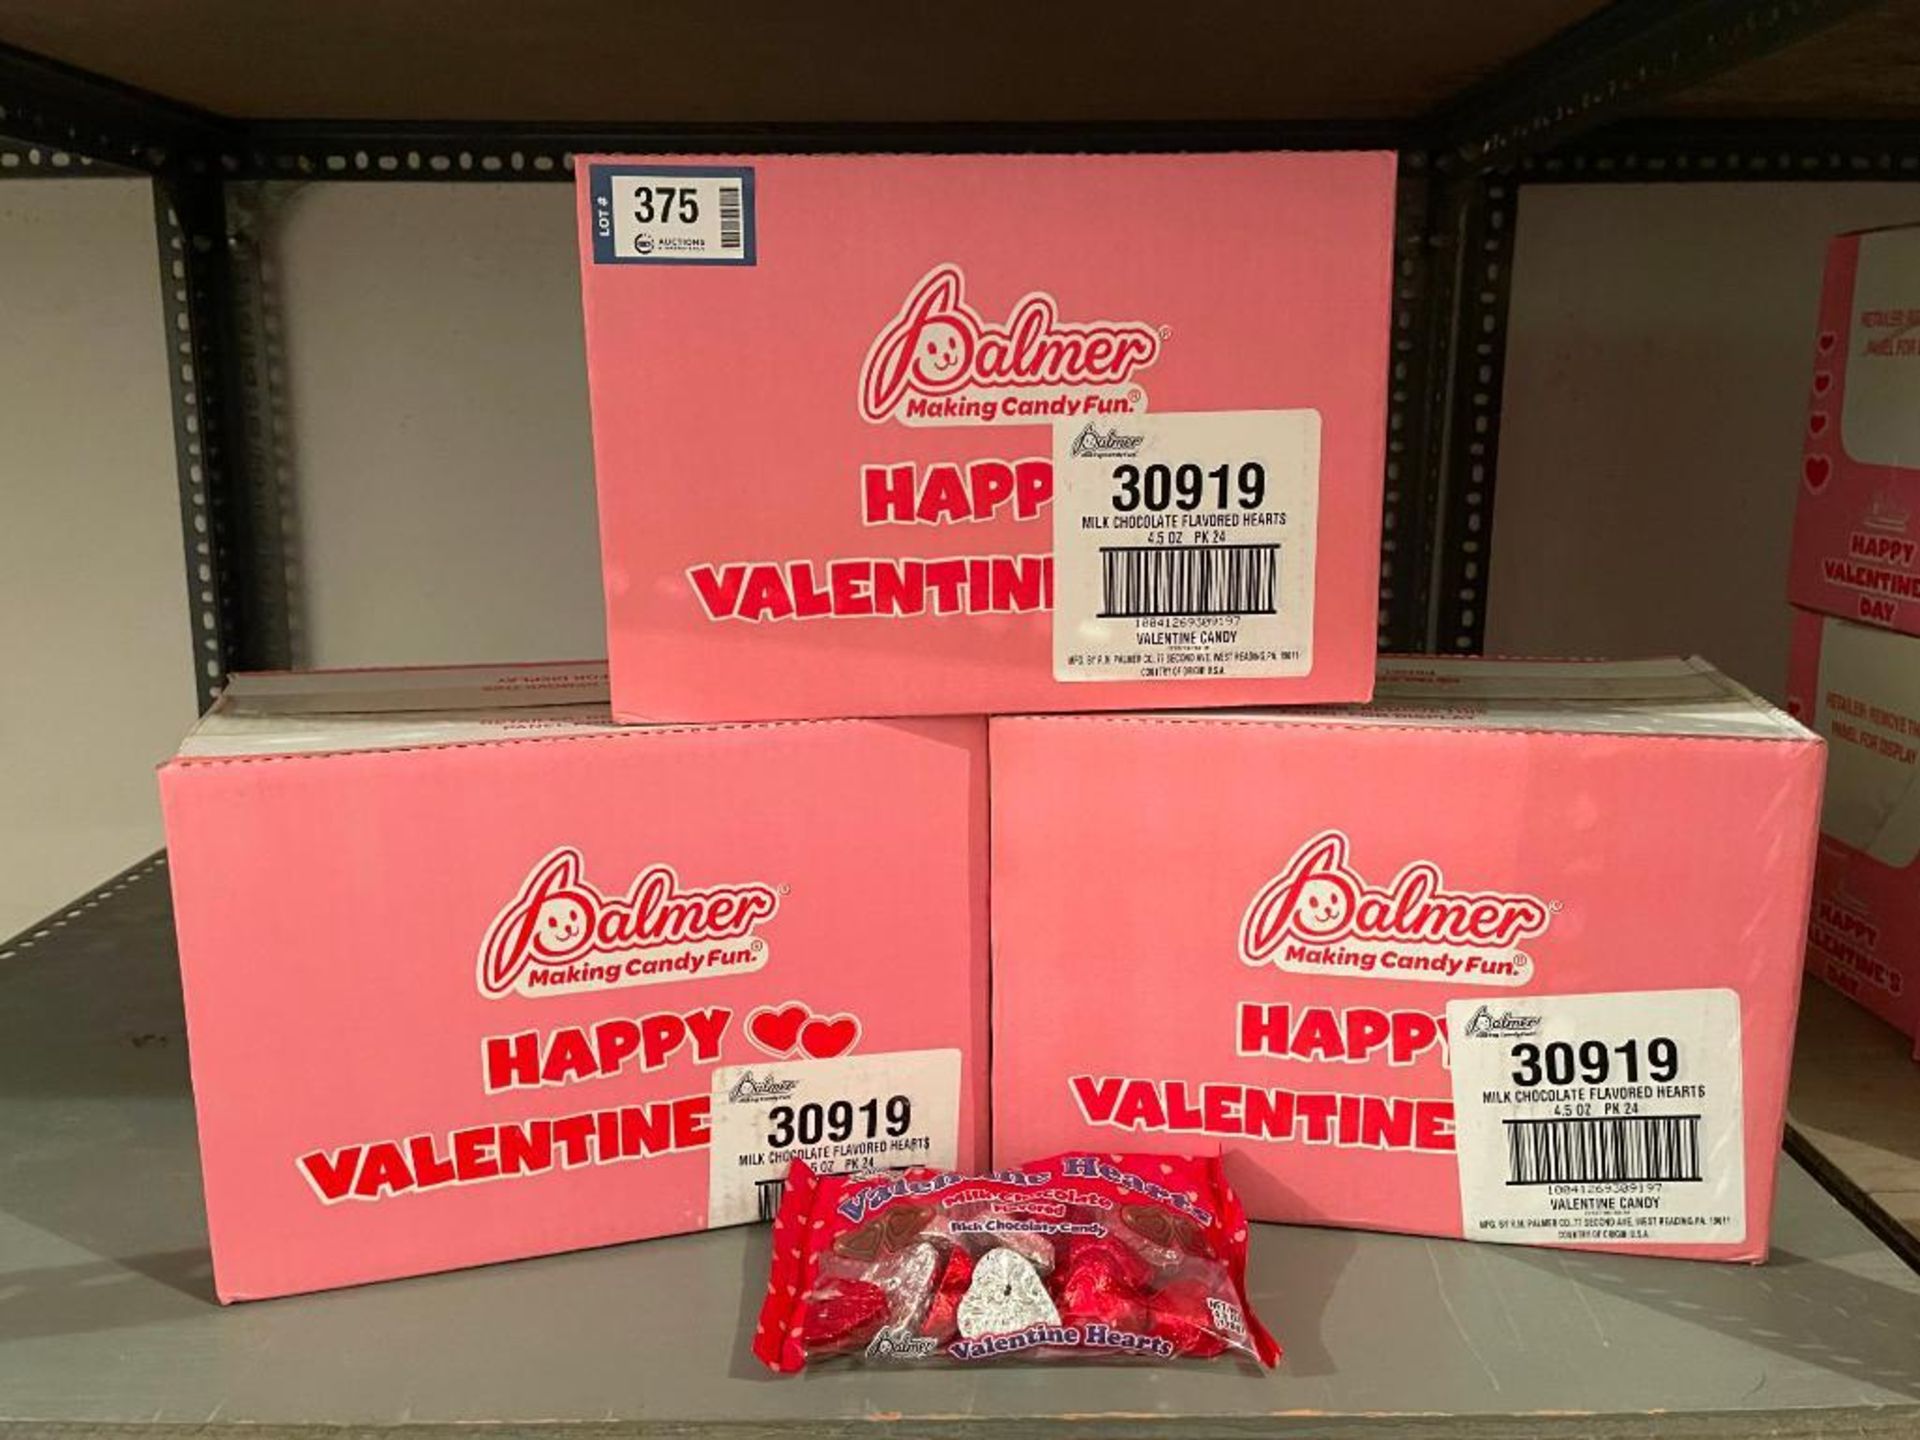 APPROX. (3) BOXES OF PALMER MILK CHOCOLATE FLAVORED VALENTINE HEARTS